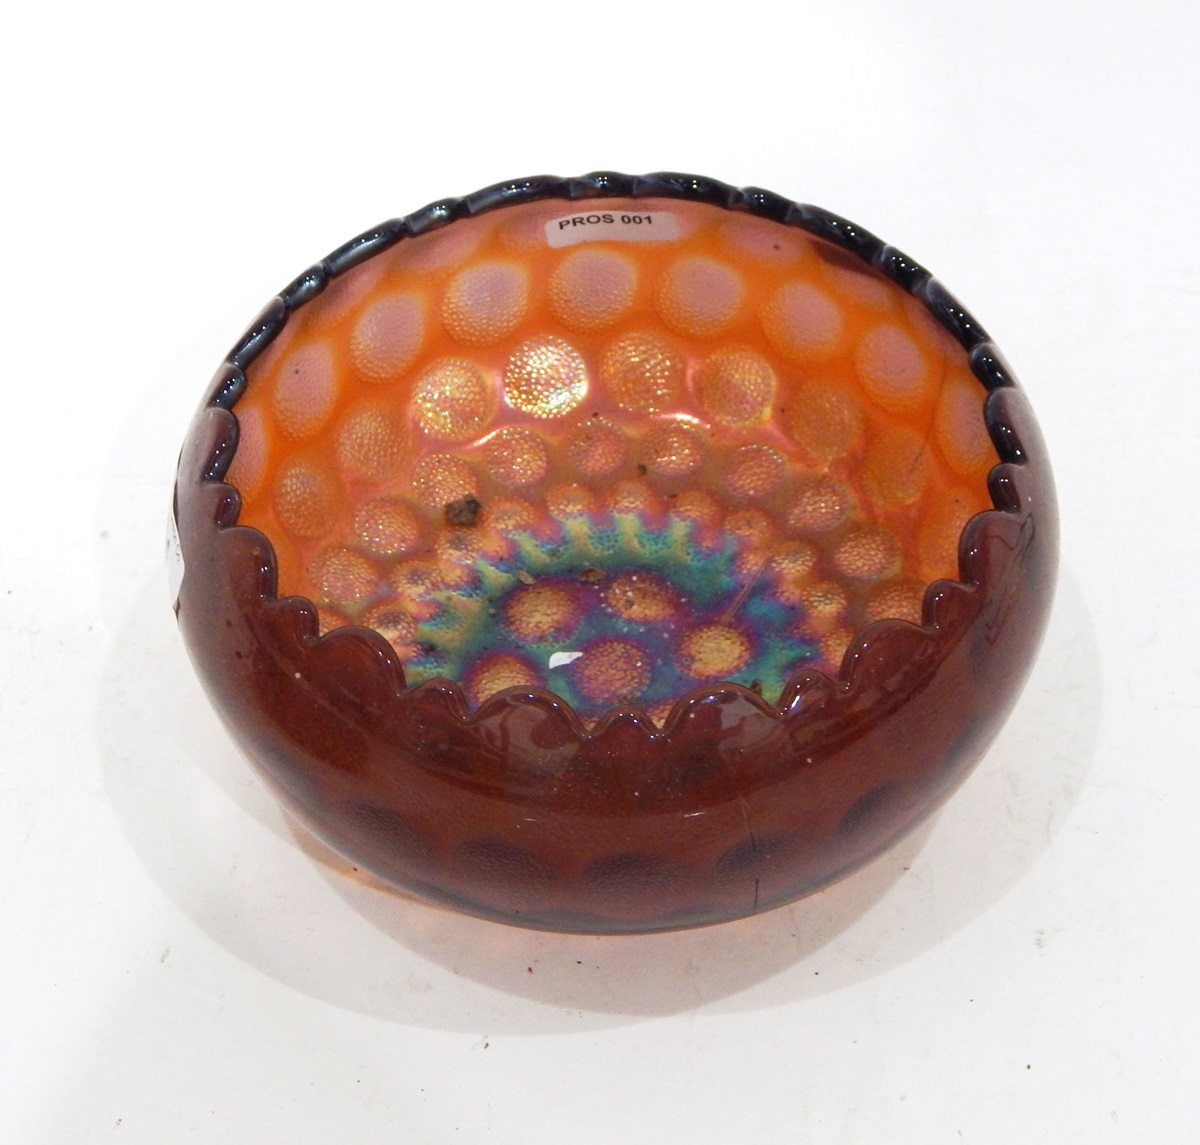 Amethyst carnival glass bowl by Millersburg in the 'Primrose' pattern, - Image 2 of 5